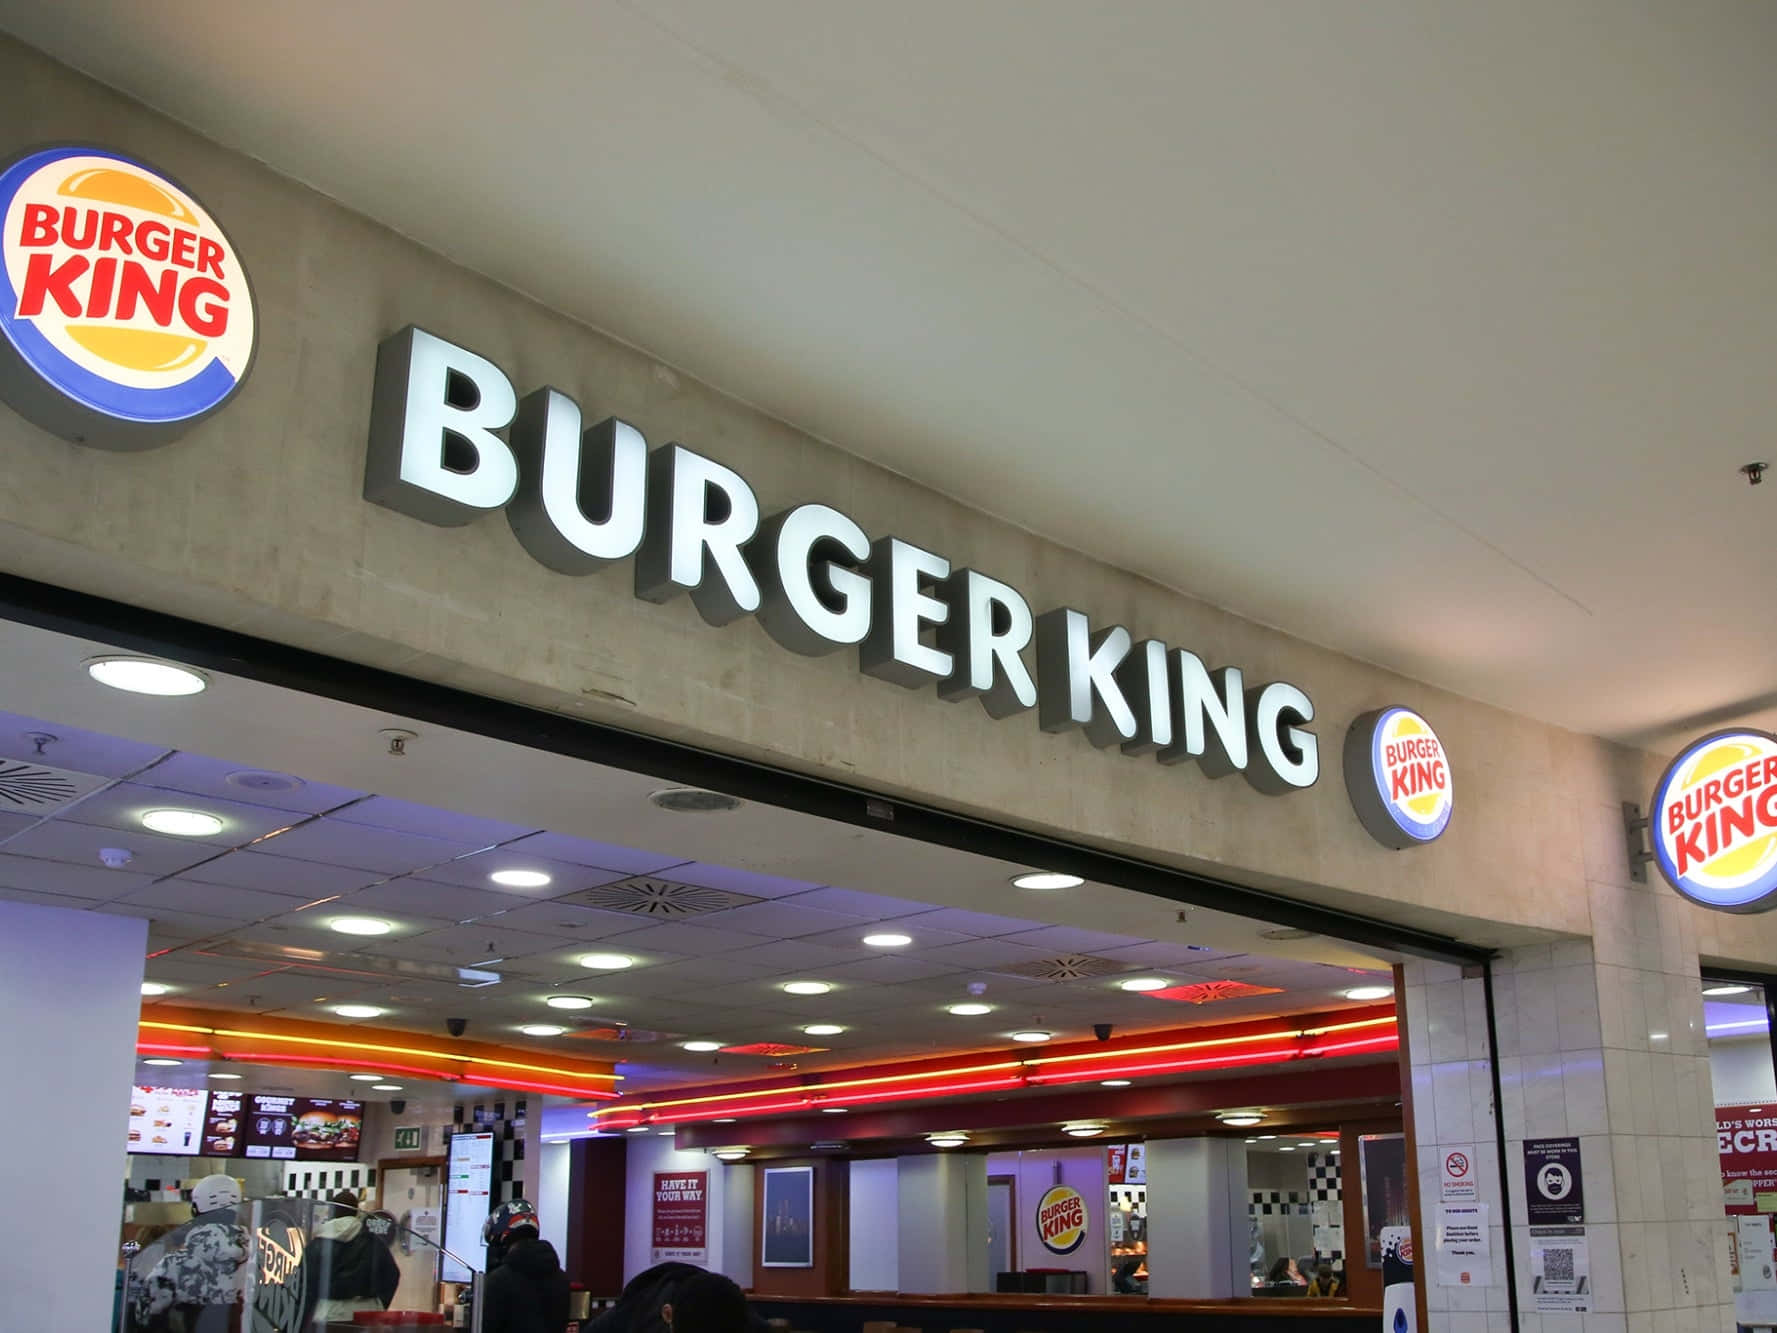 “Freshly made burgers from your local Burger King”